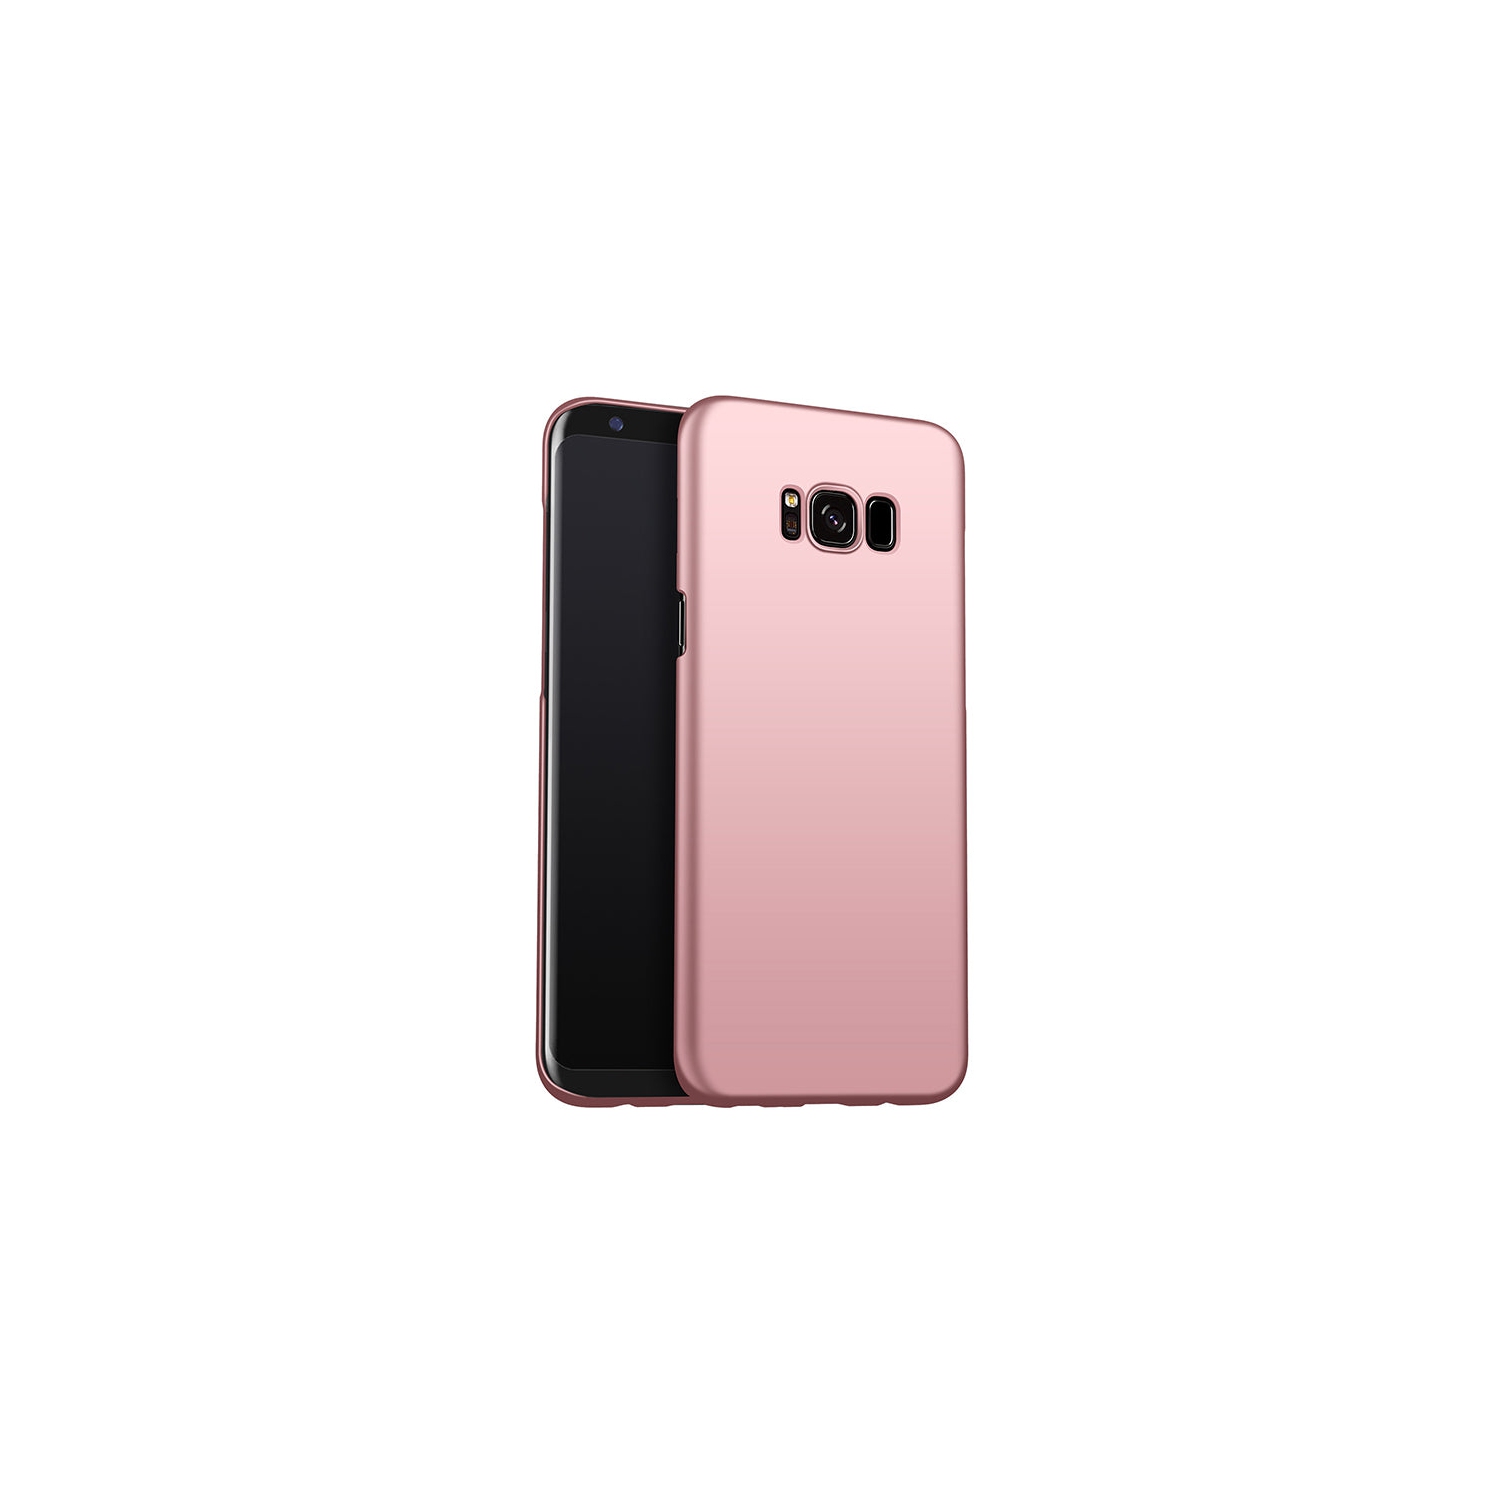 PANDACO Hard Shell Rose Gold Case for Samsung Galaxy S8+